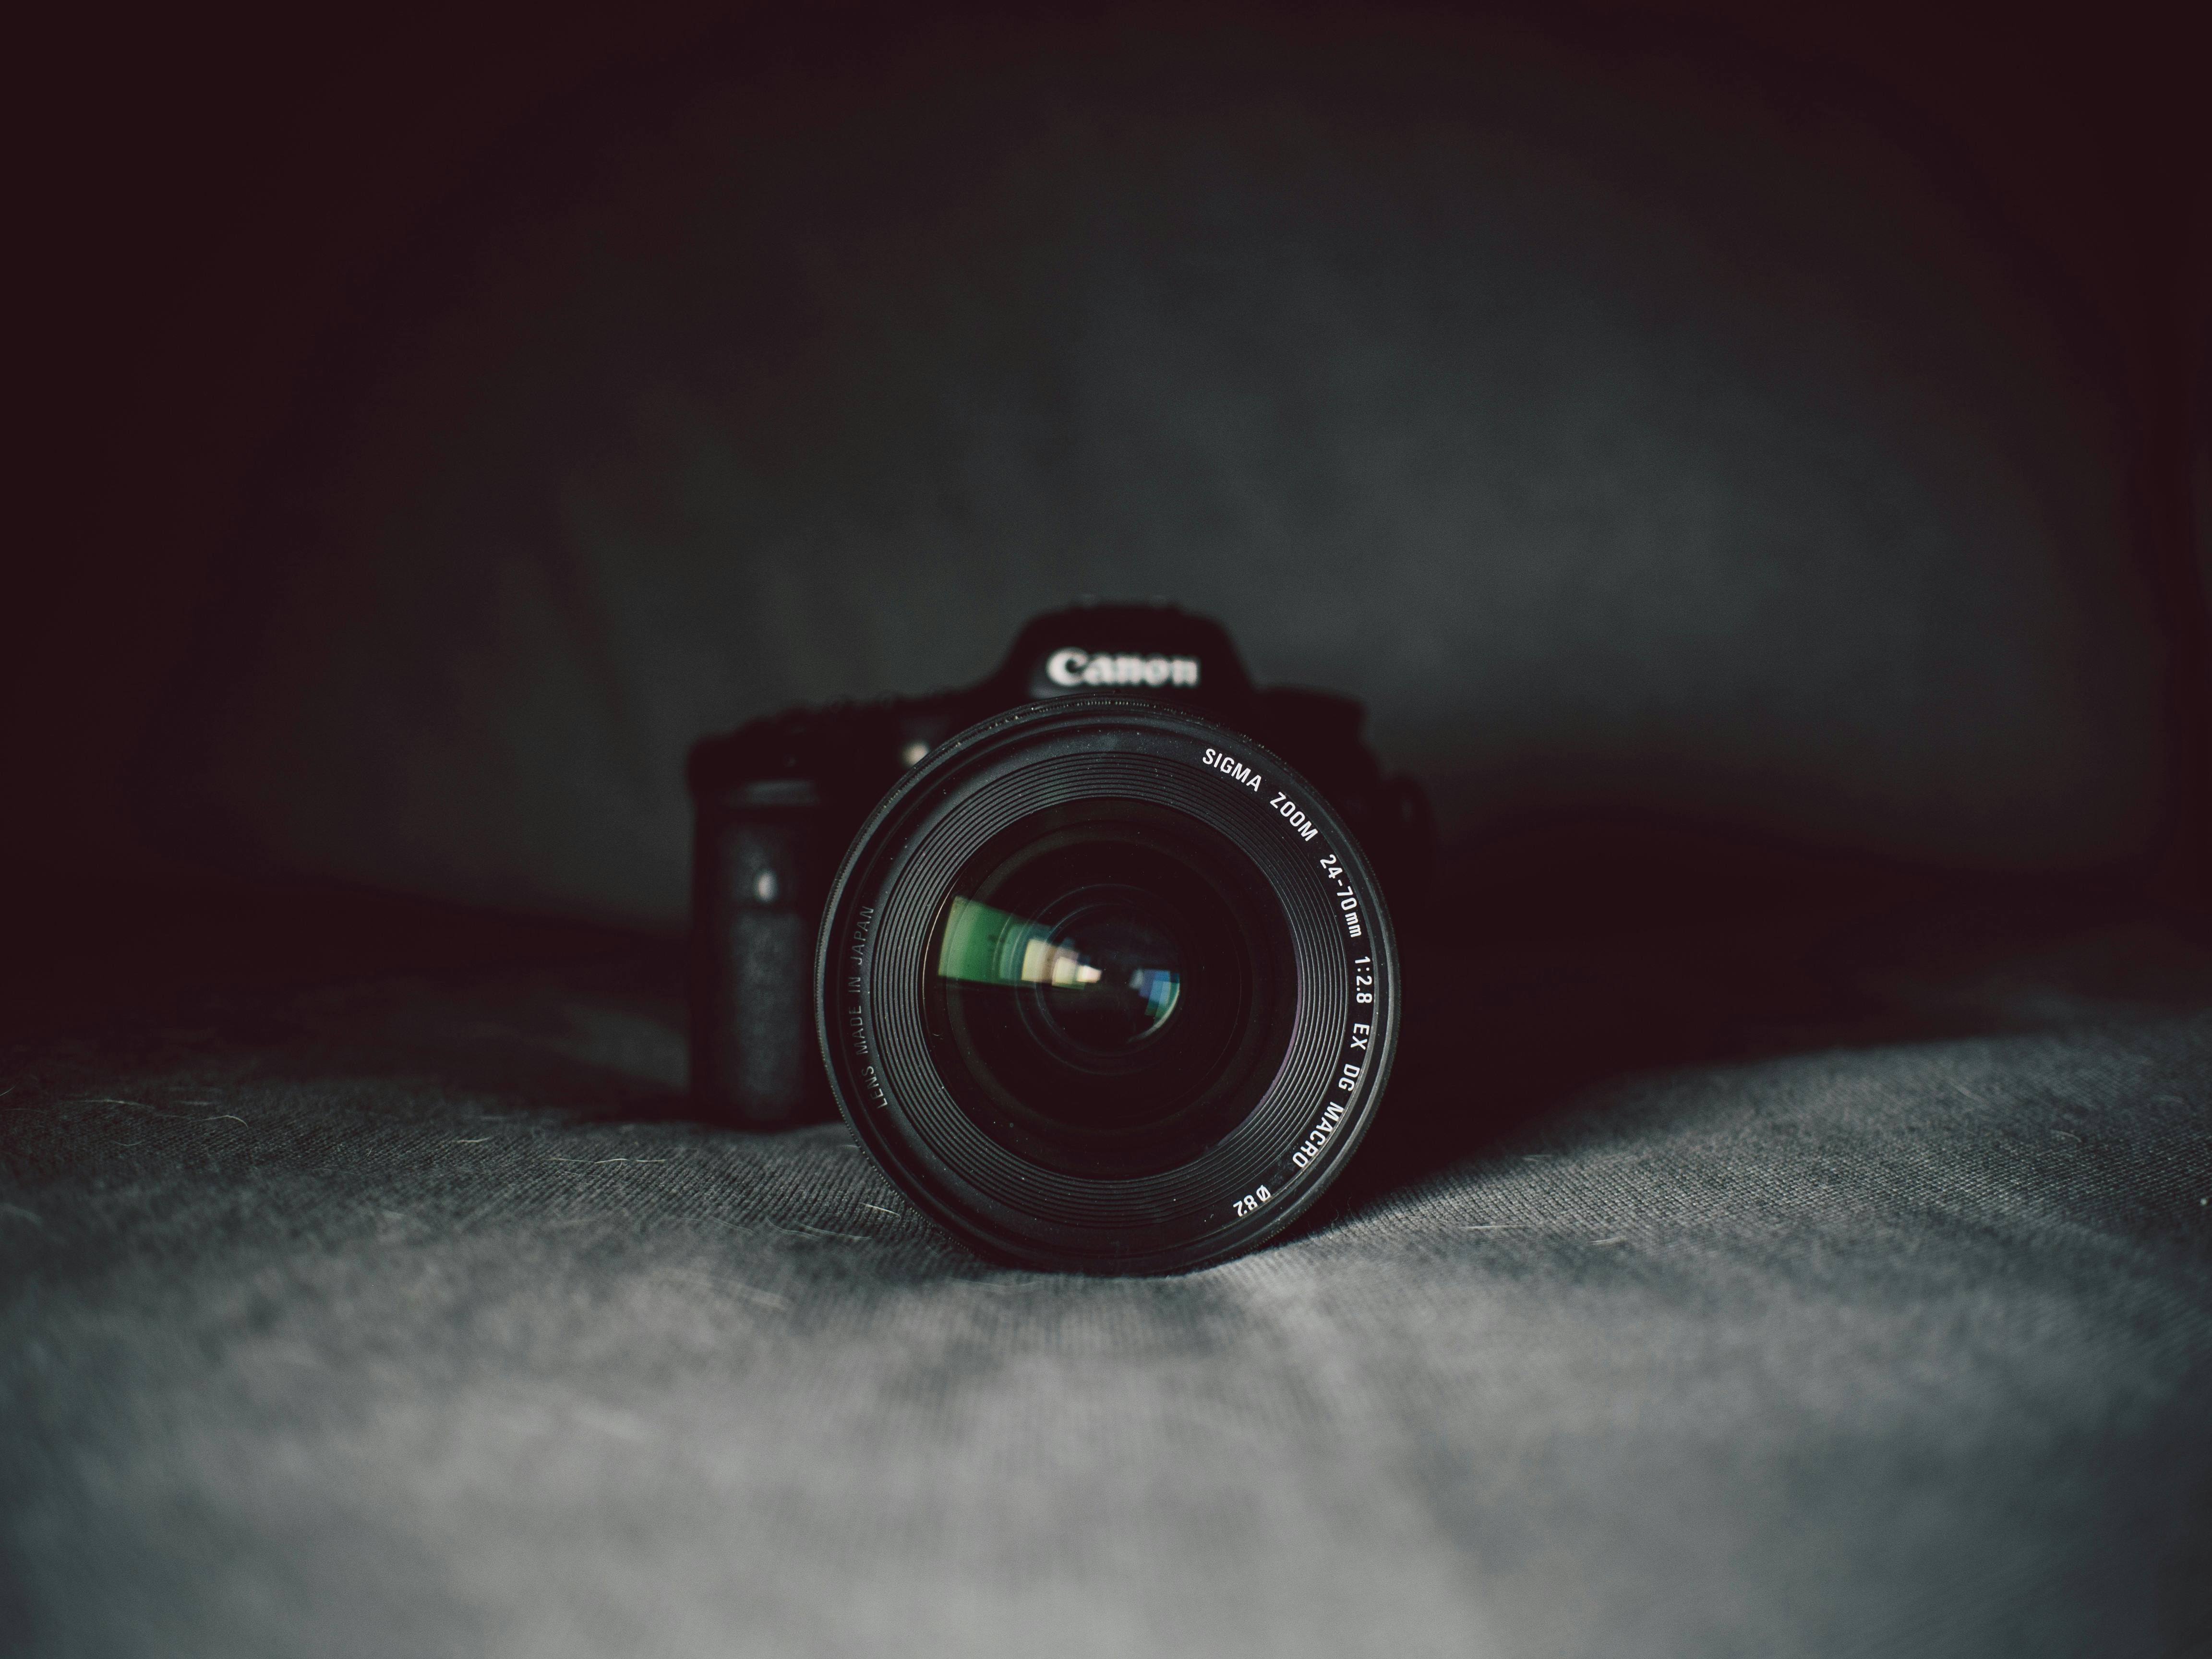 professional photography cameras wallpapers